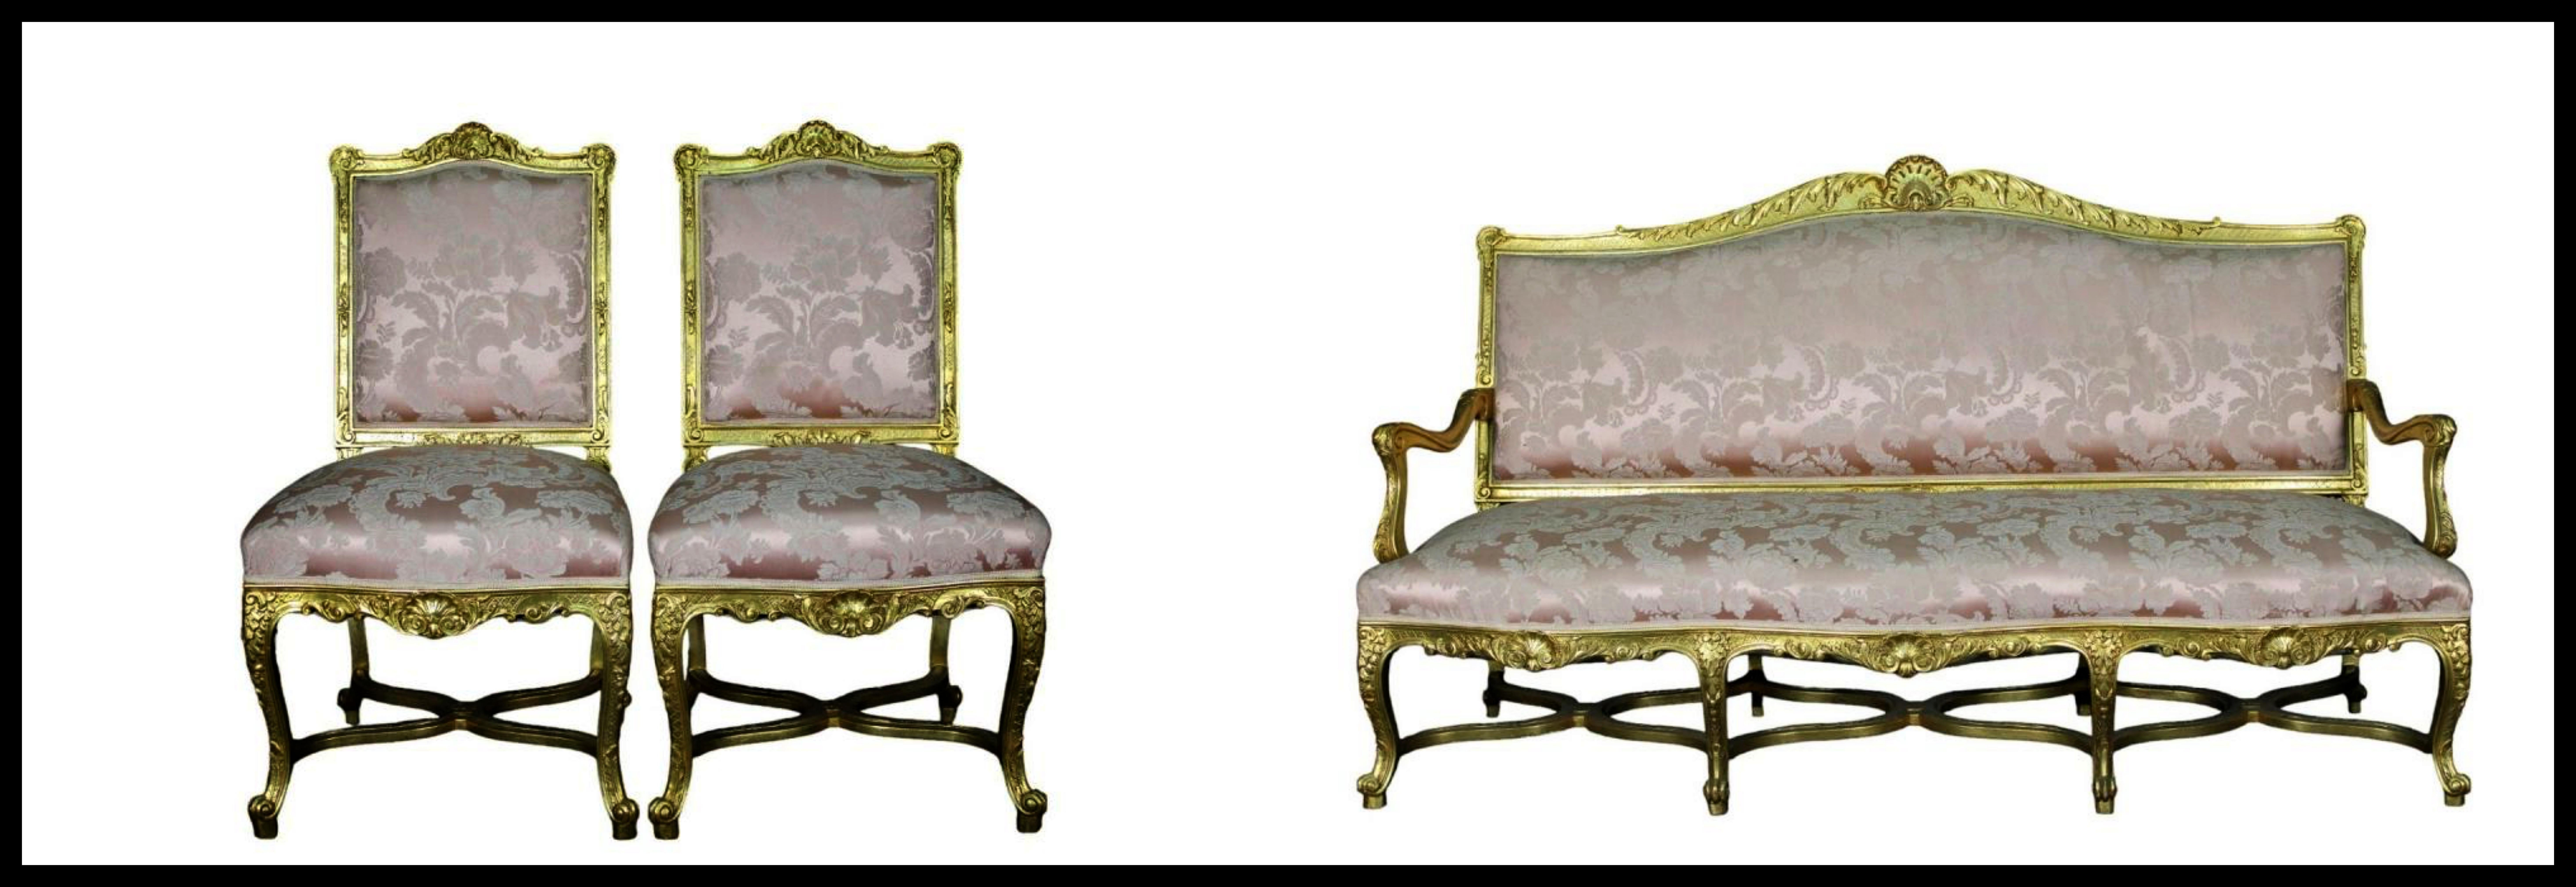 19th Century French Sofa and Two Chairs Set

SOFA
in richly inlaid and gilded wood, French manufacture
  h 114 x 190 x 65 cm

TWO CHAIRS
in richly inlaid and gilded wood, French manufacture
h 97 x 56 x 47 cm

good condition, original